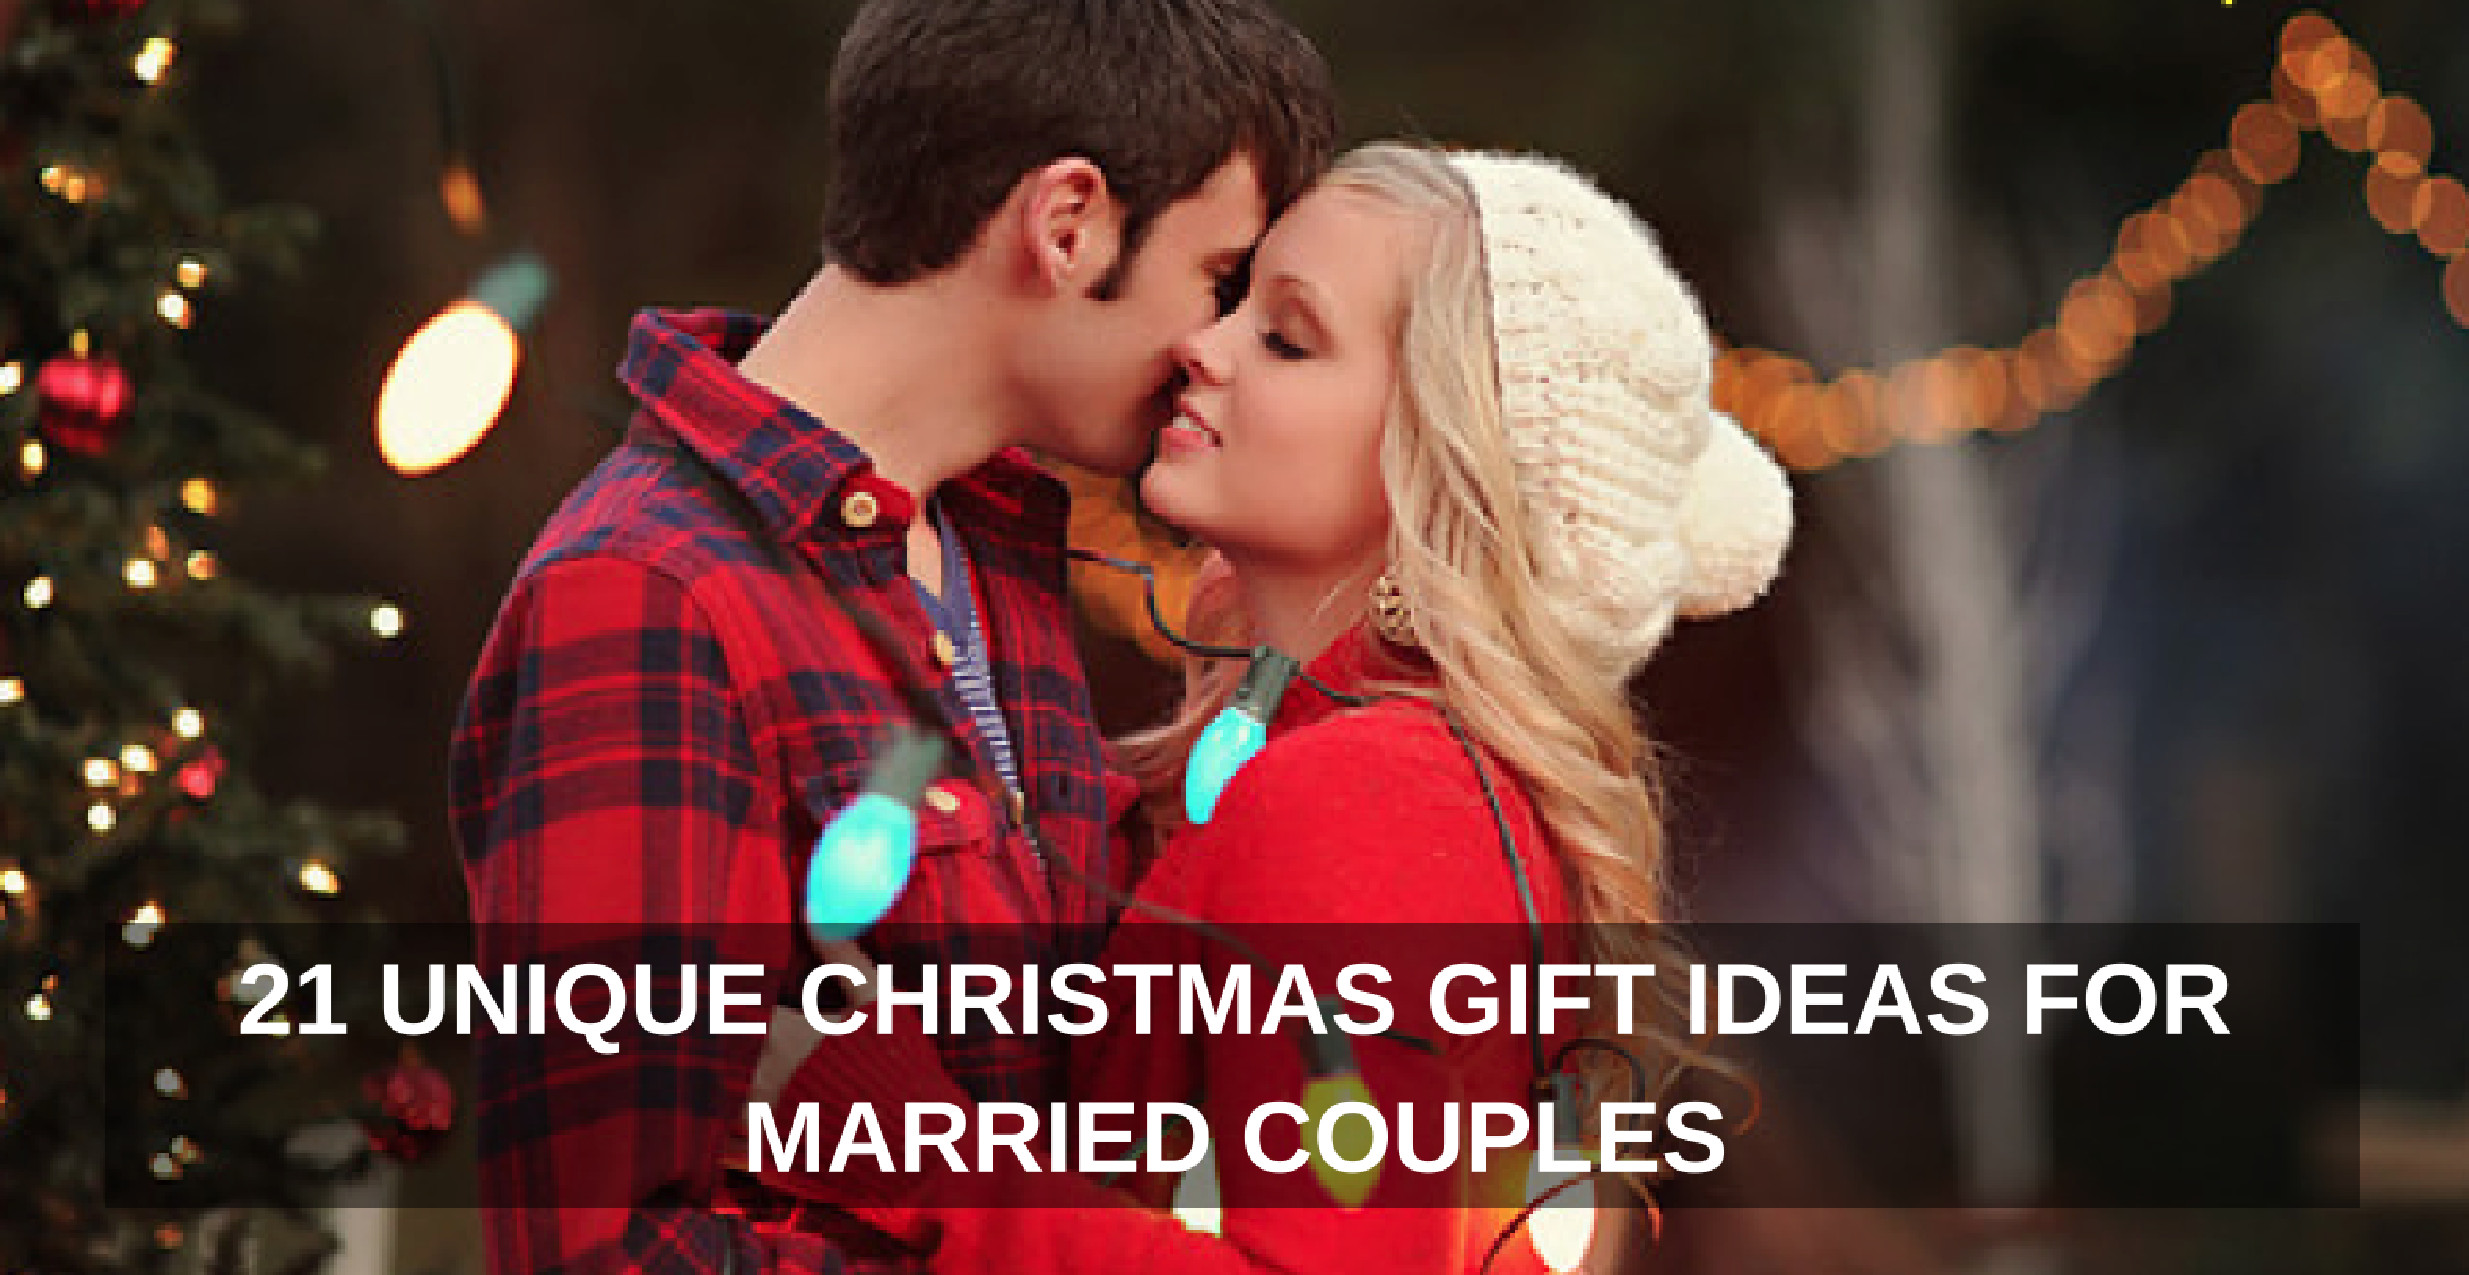 Christmas Gift Ideas For Older Couple
 21 Unique Christmas Gift Ideas for Married Couples